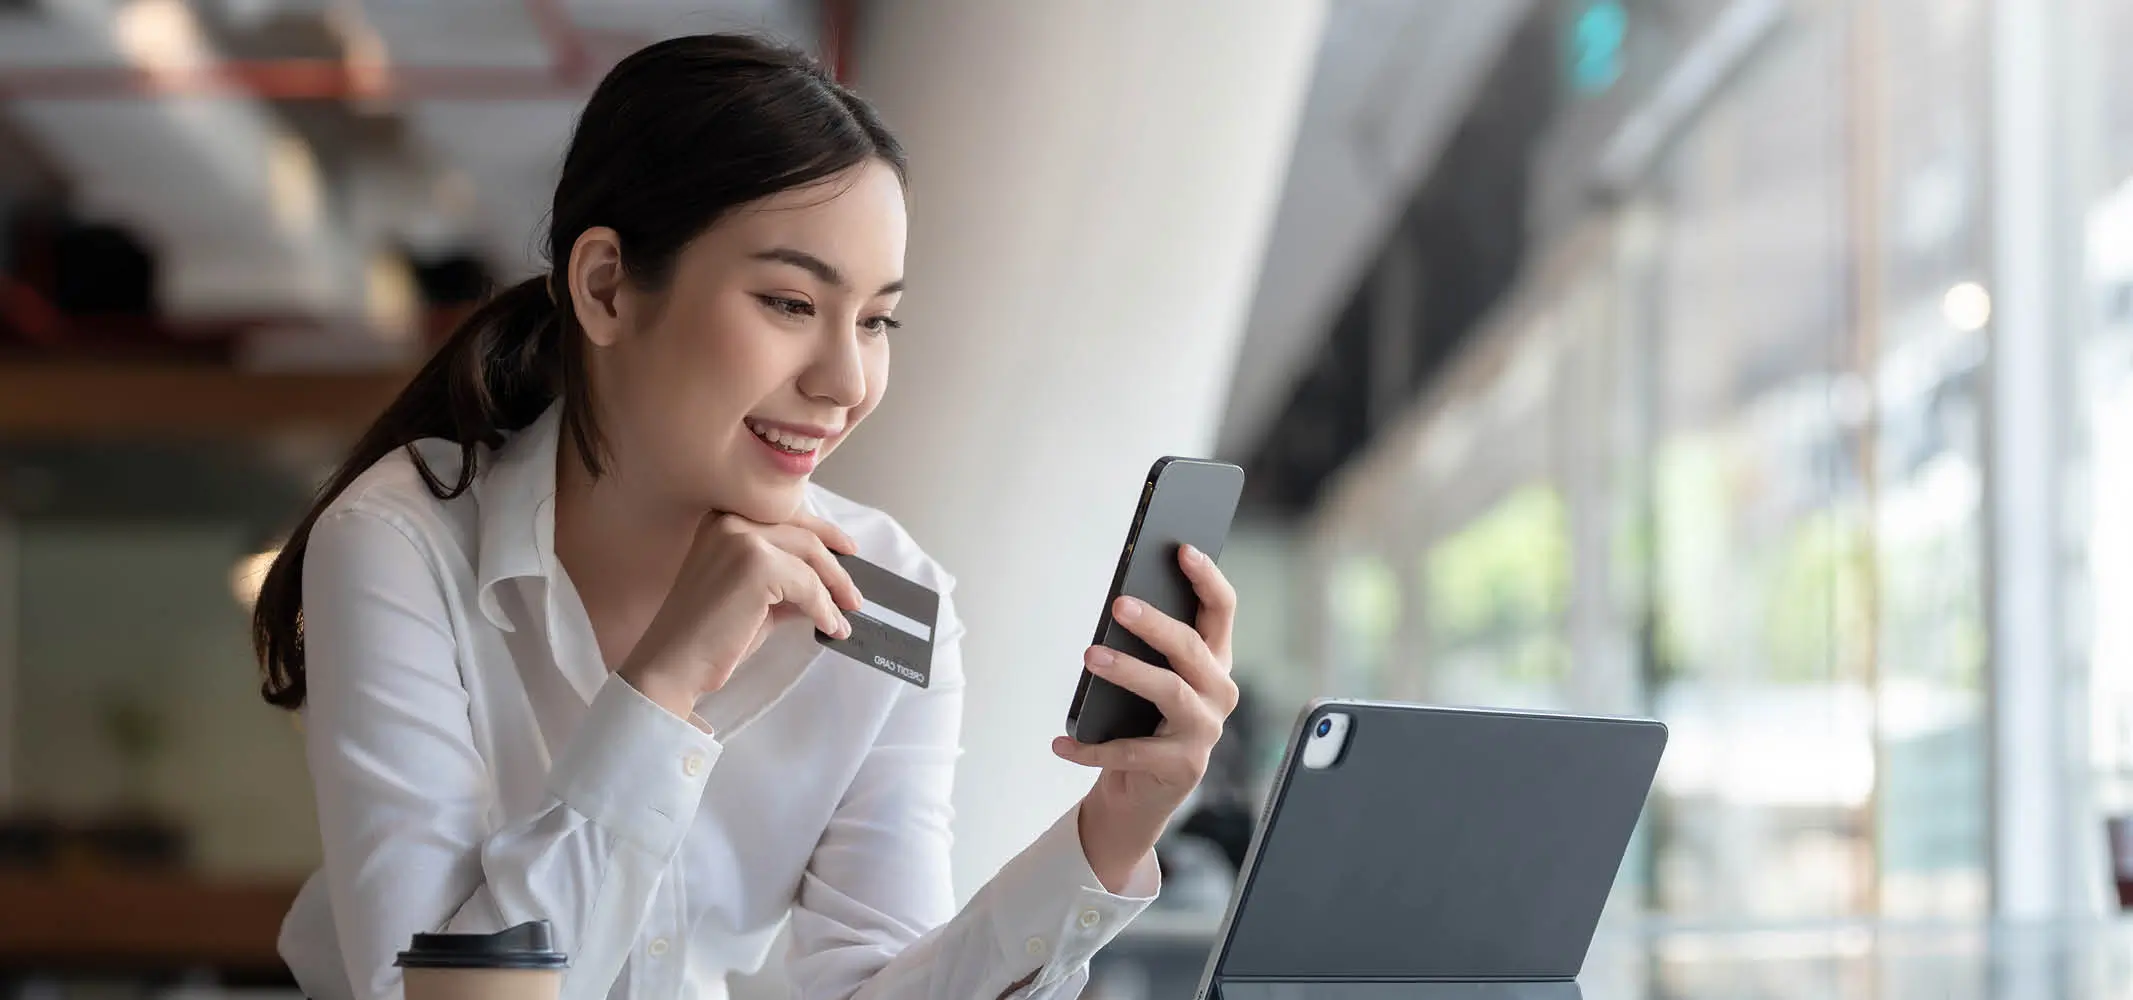 Happy woman using the e-banking services while interacting with a chatbot